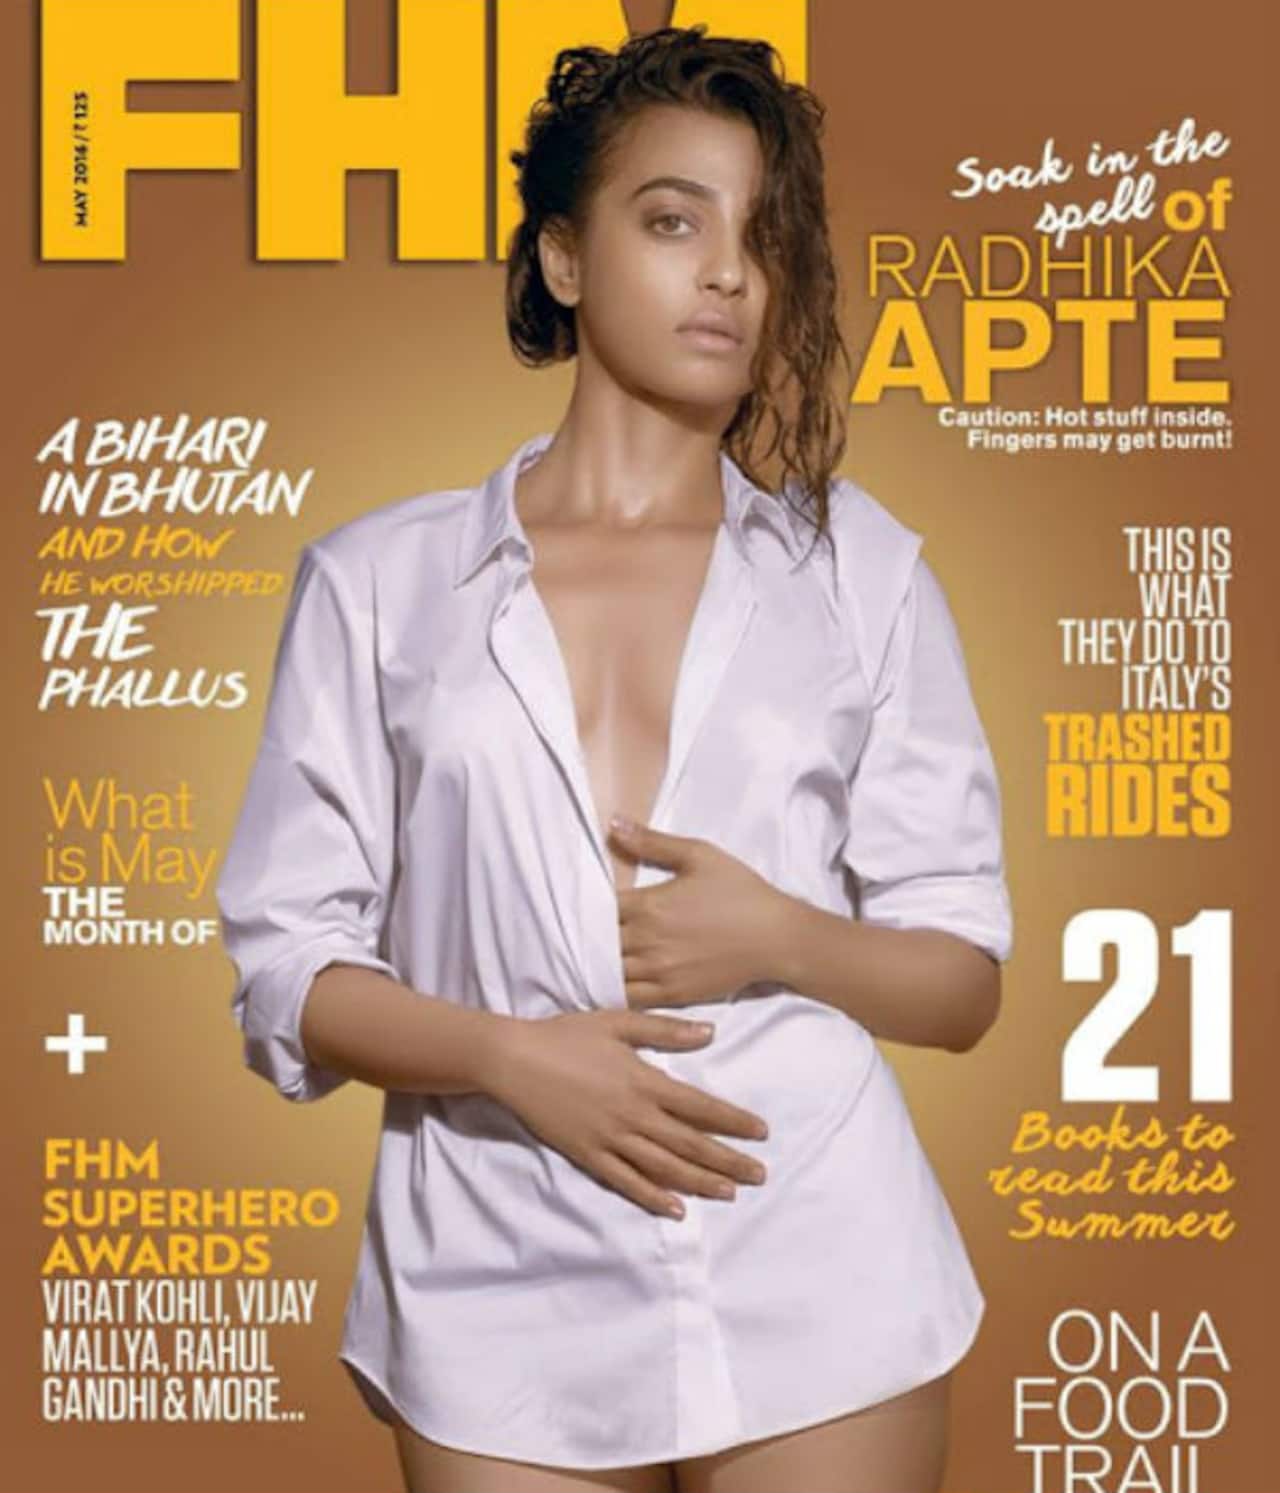 Radhika Apte UNBUTTONS for a magazine cover and it's HOT AF!